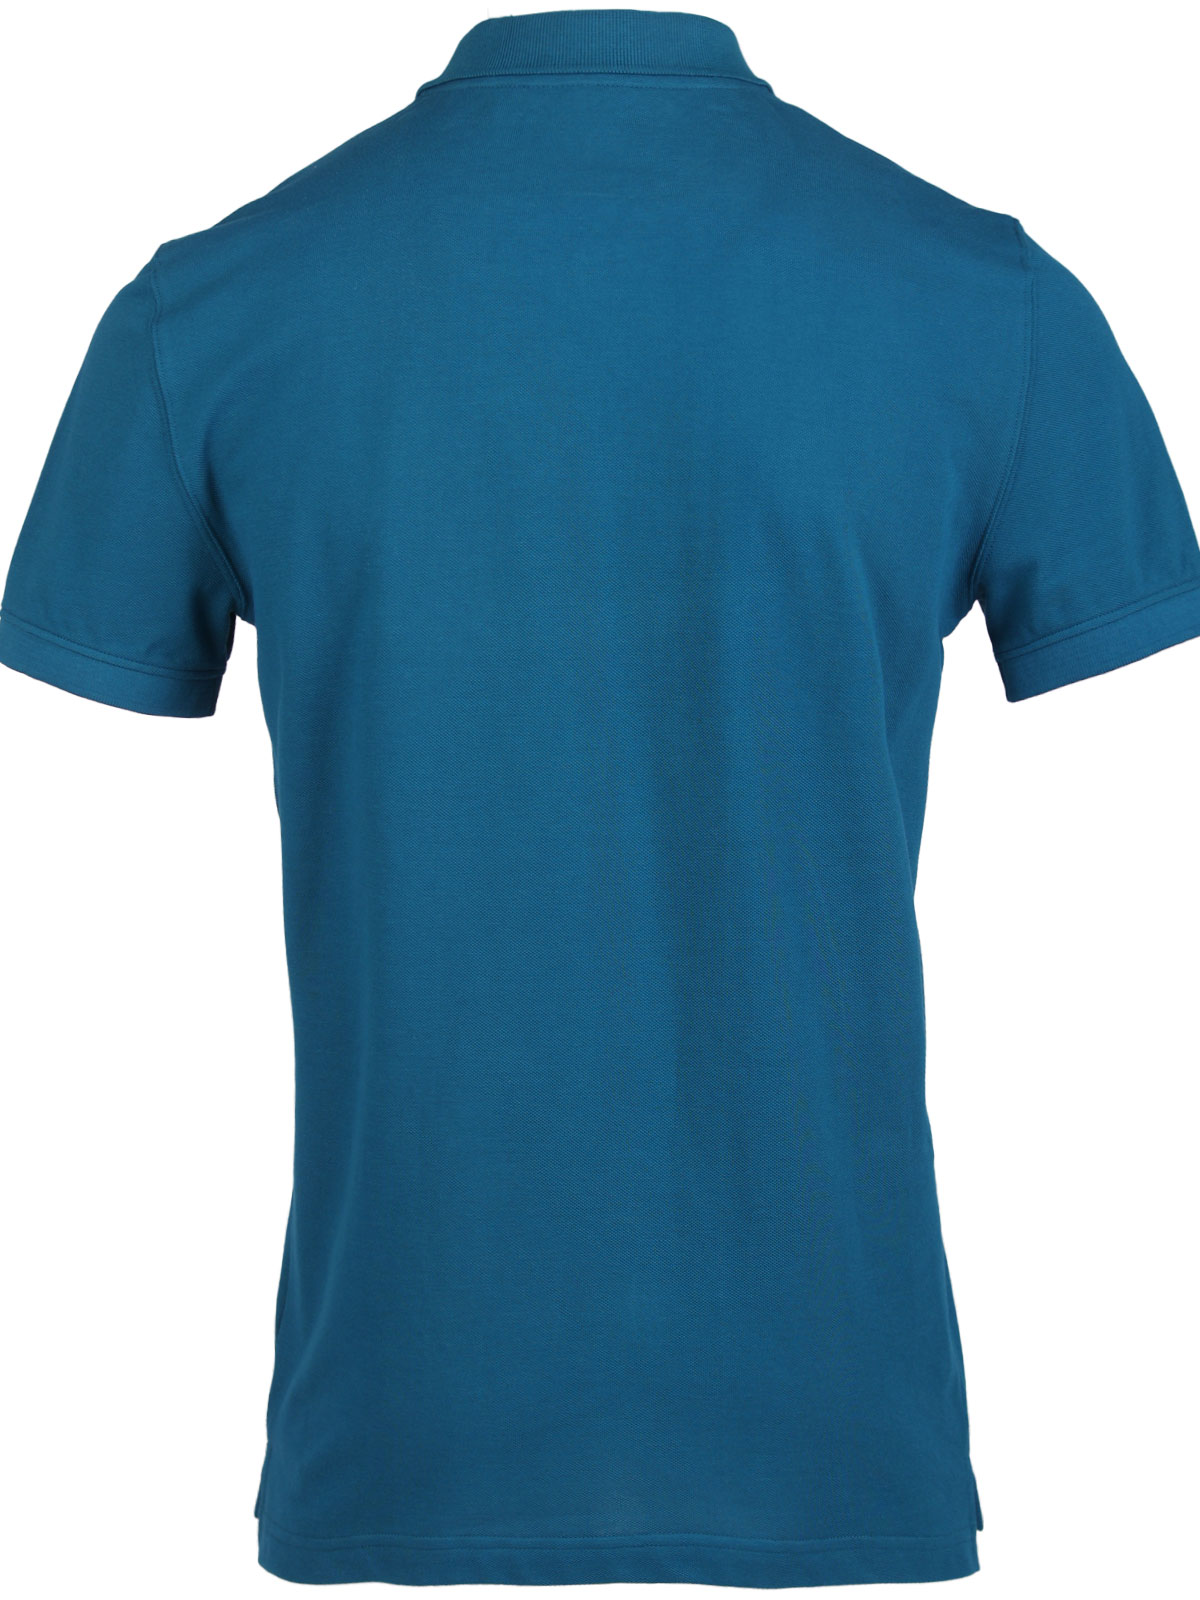 Tshirt in turquoise with a knitted coll - 93435 € 37.12 img2